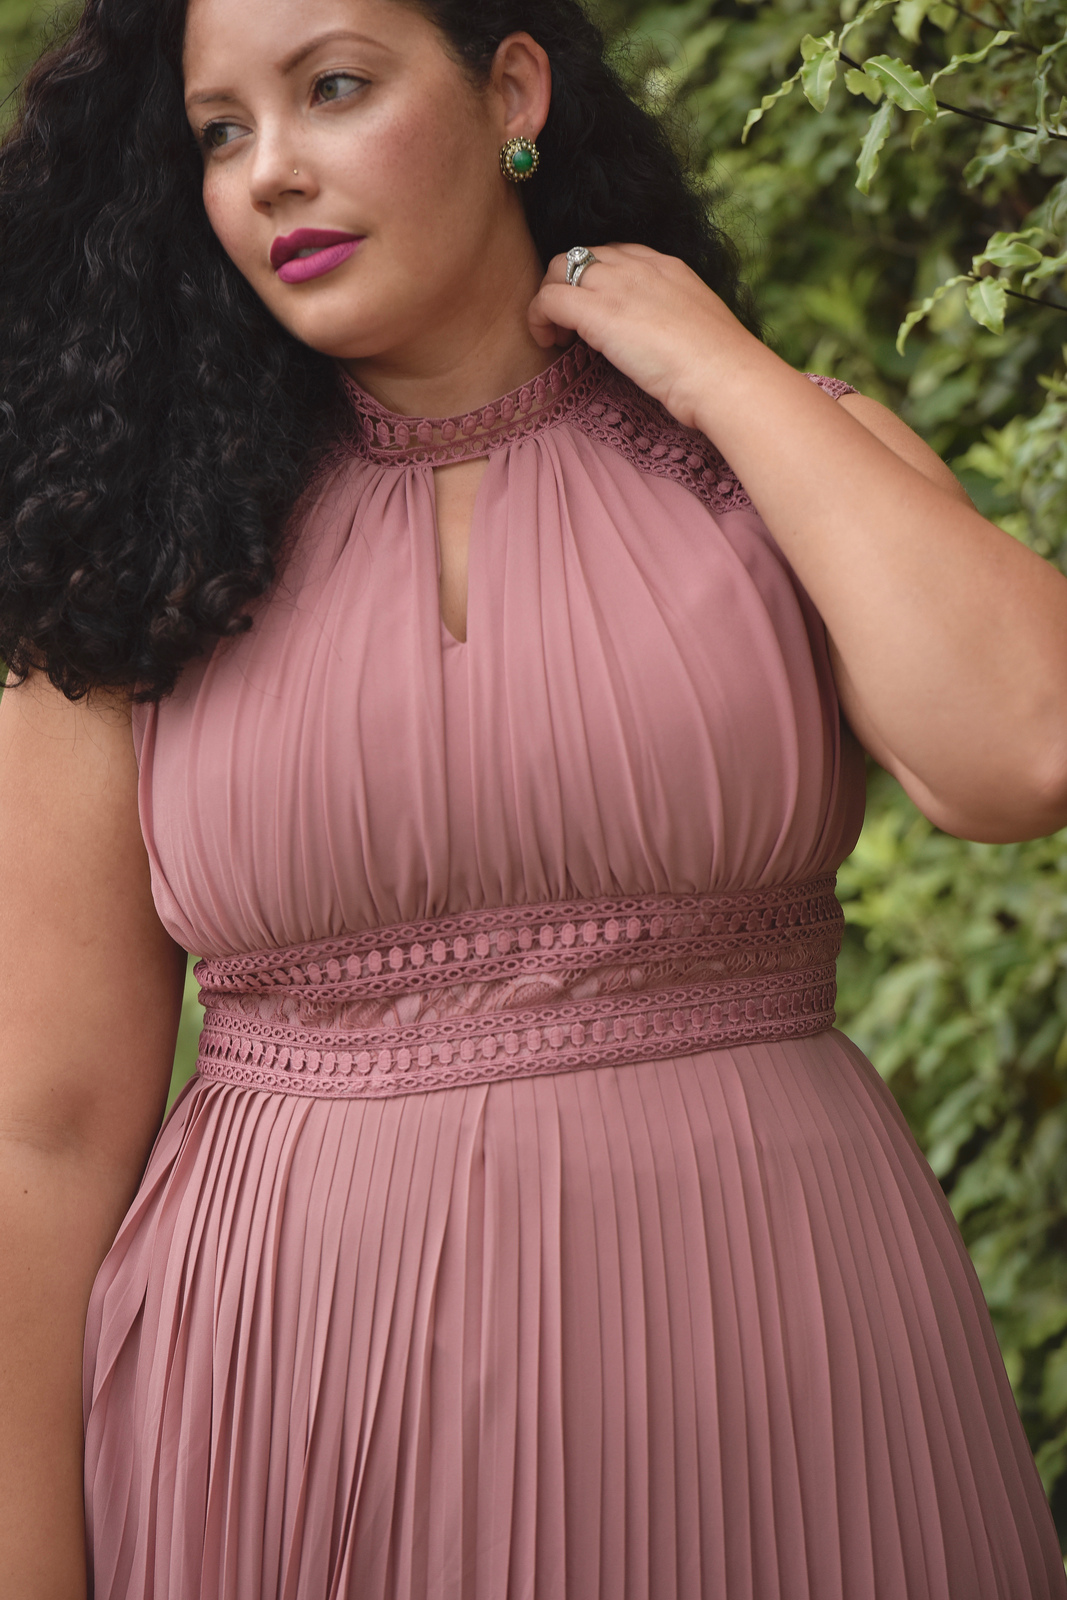 Girl With Curves blogger Tanesha Awasthi wears a lace detail plus size maxi dress and emerald accessories.